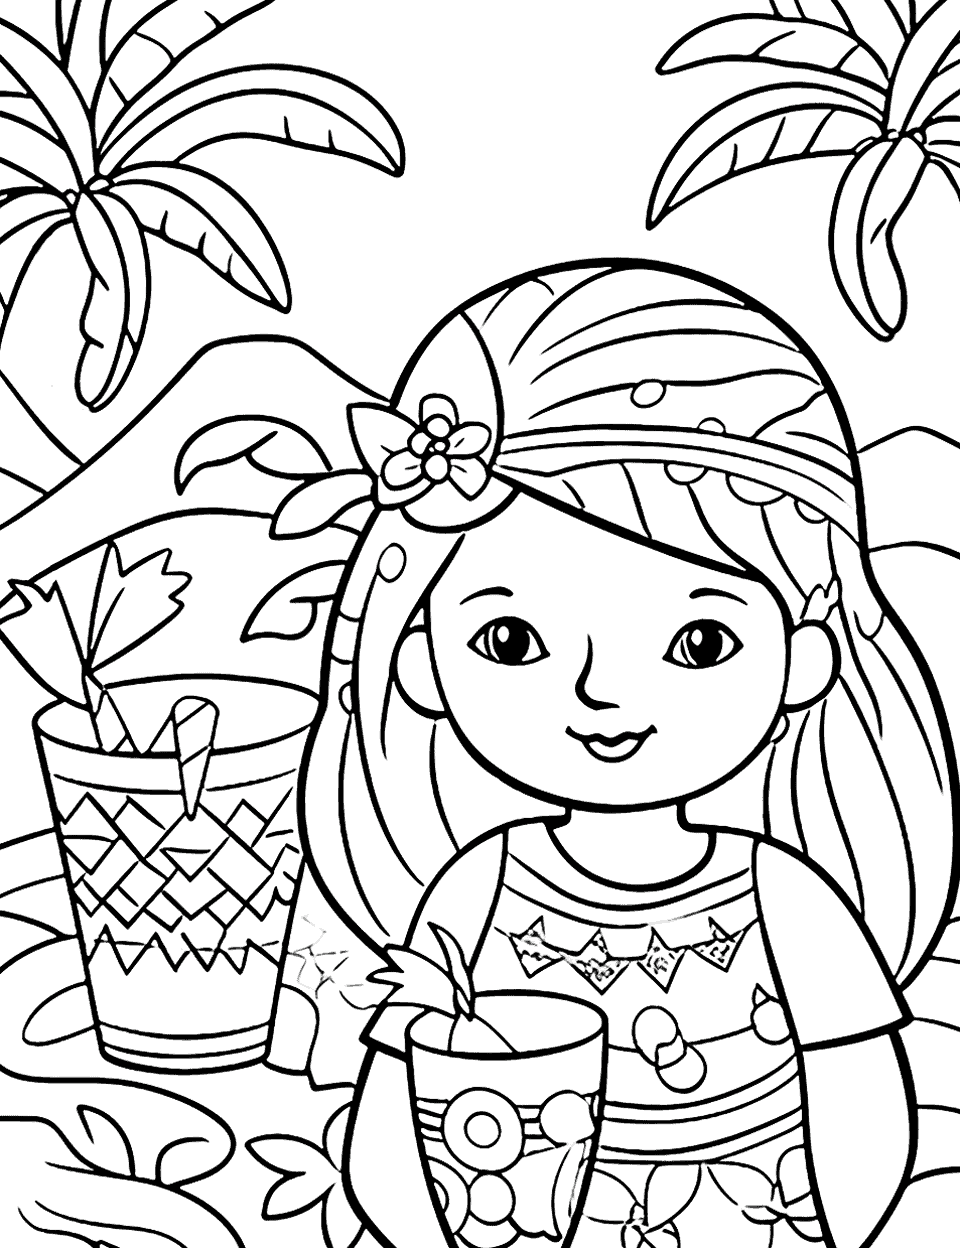 Kawaii Tropical Vacation Adult Coloring Page - Cute, kawaii-style characters on a tropical vacation, complete with palm trees and fruity drinks.